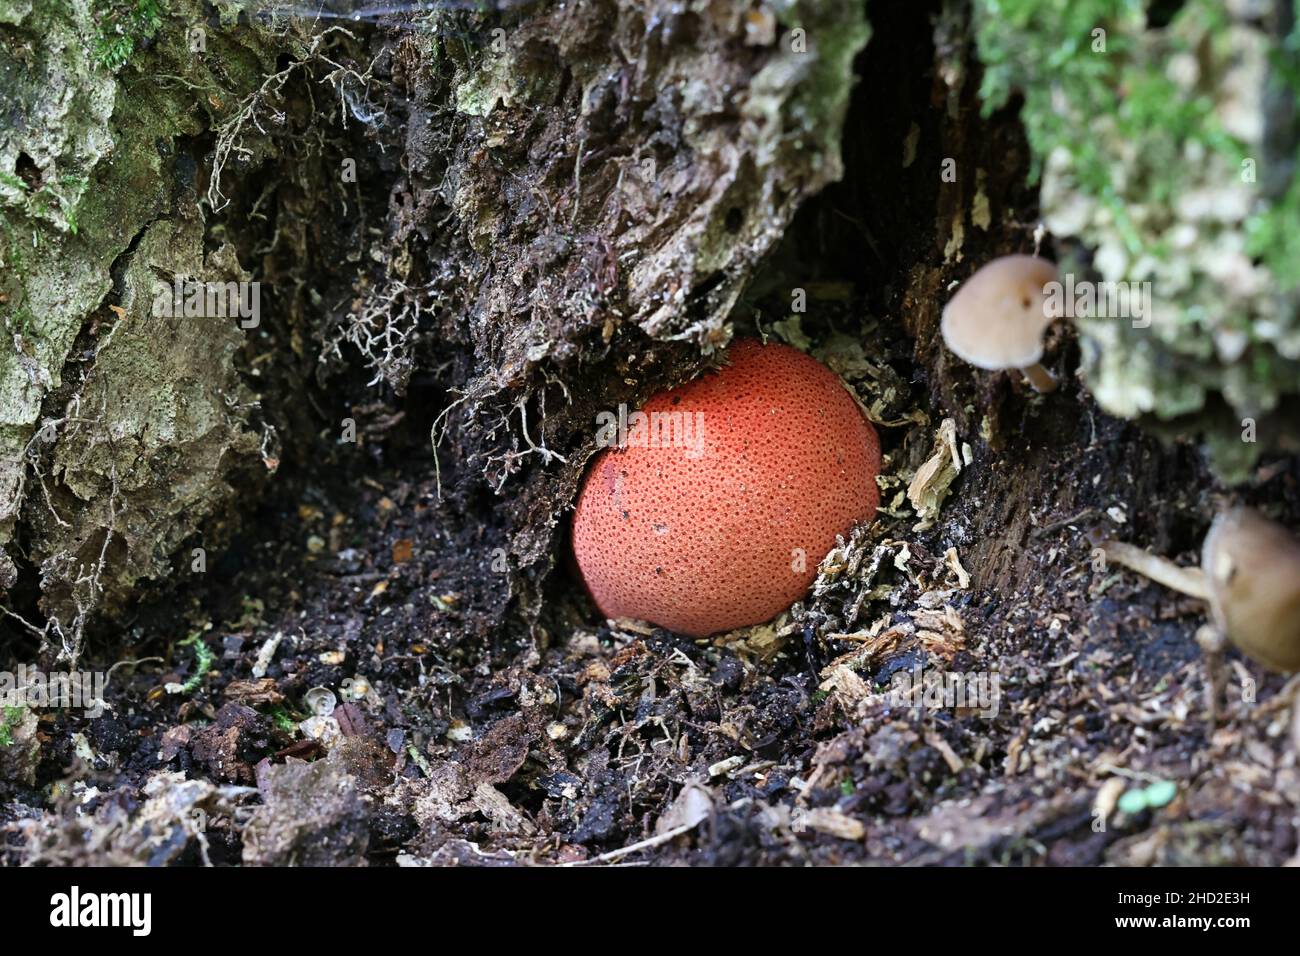 Fistulina hepatica, known as beefsteak fungus, beefsteak polypore, ox tongue, or tongue mushroom, wild polypore from Finland Stock Photo